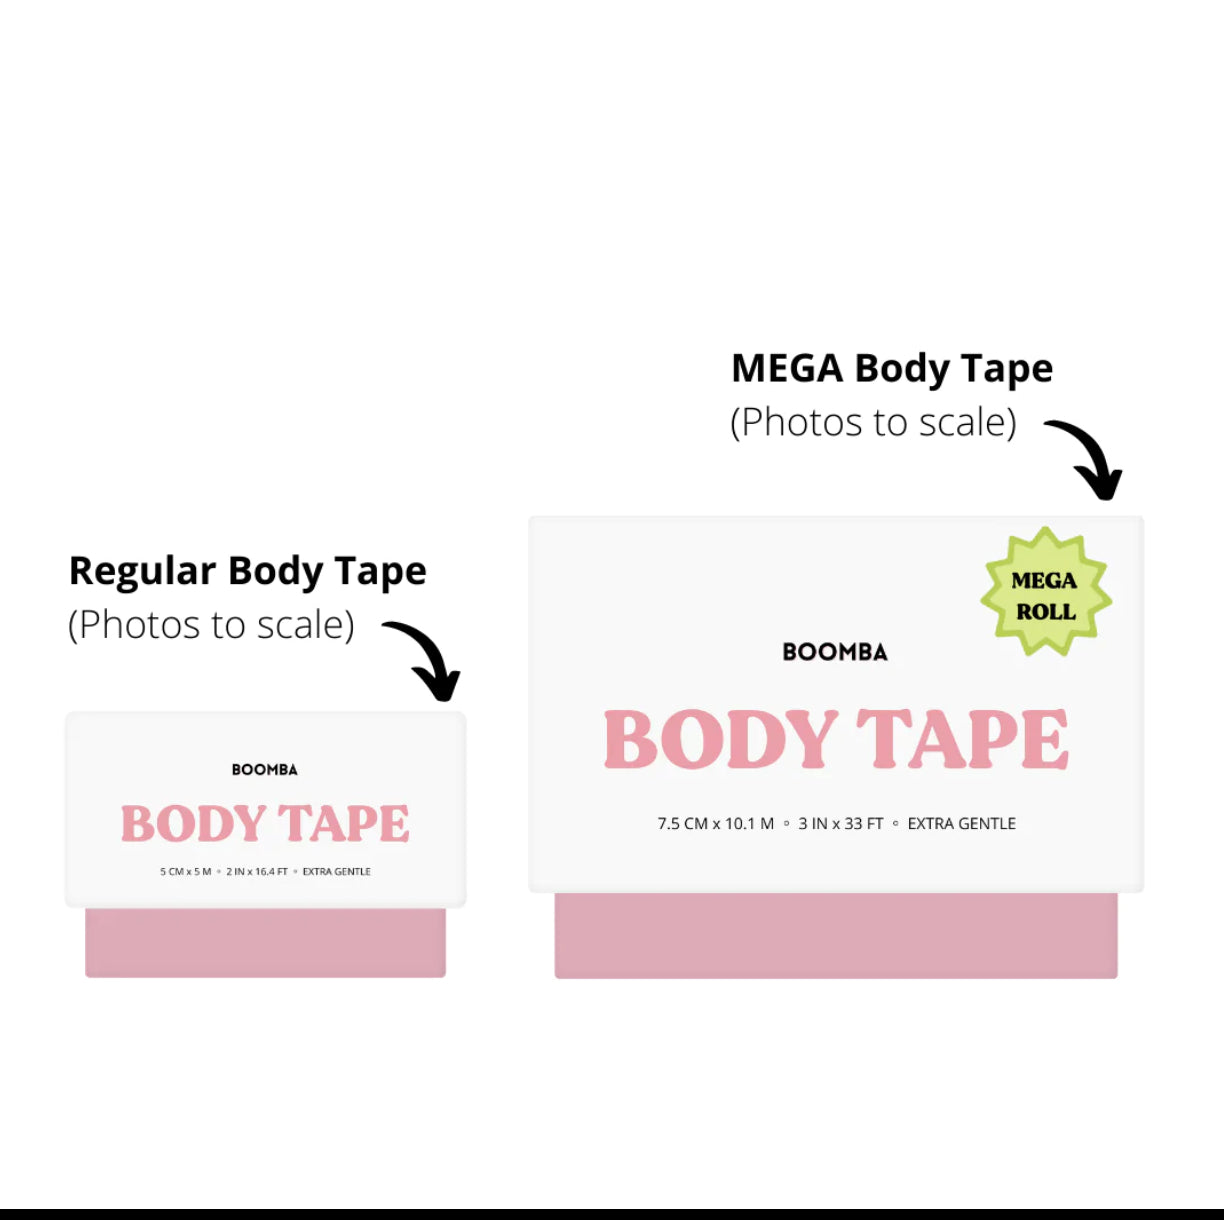 Difference between boomba Body Tape and Mega Roll Body Tape